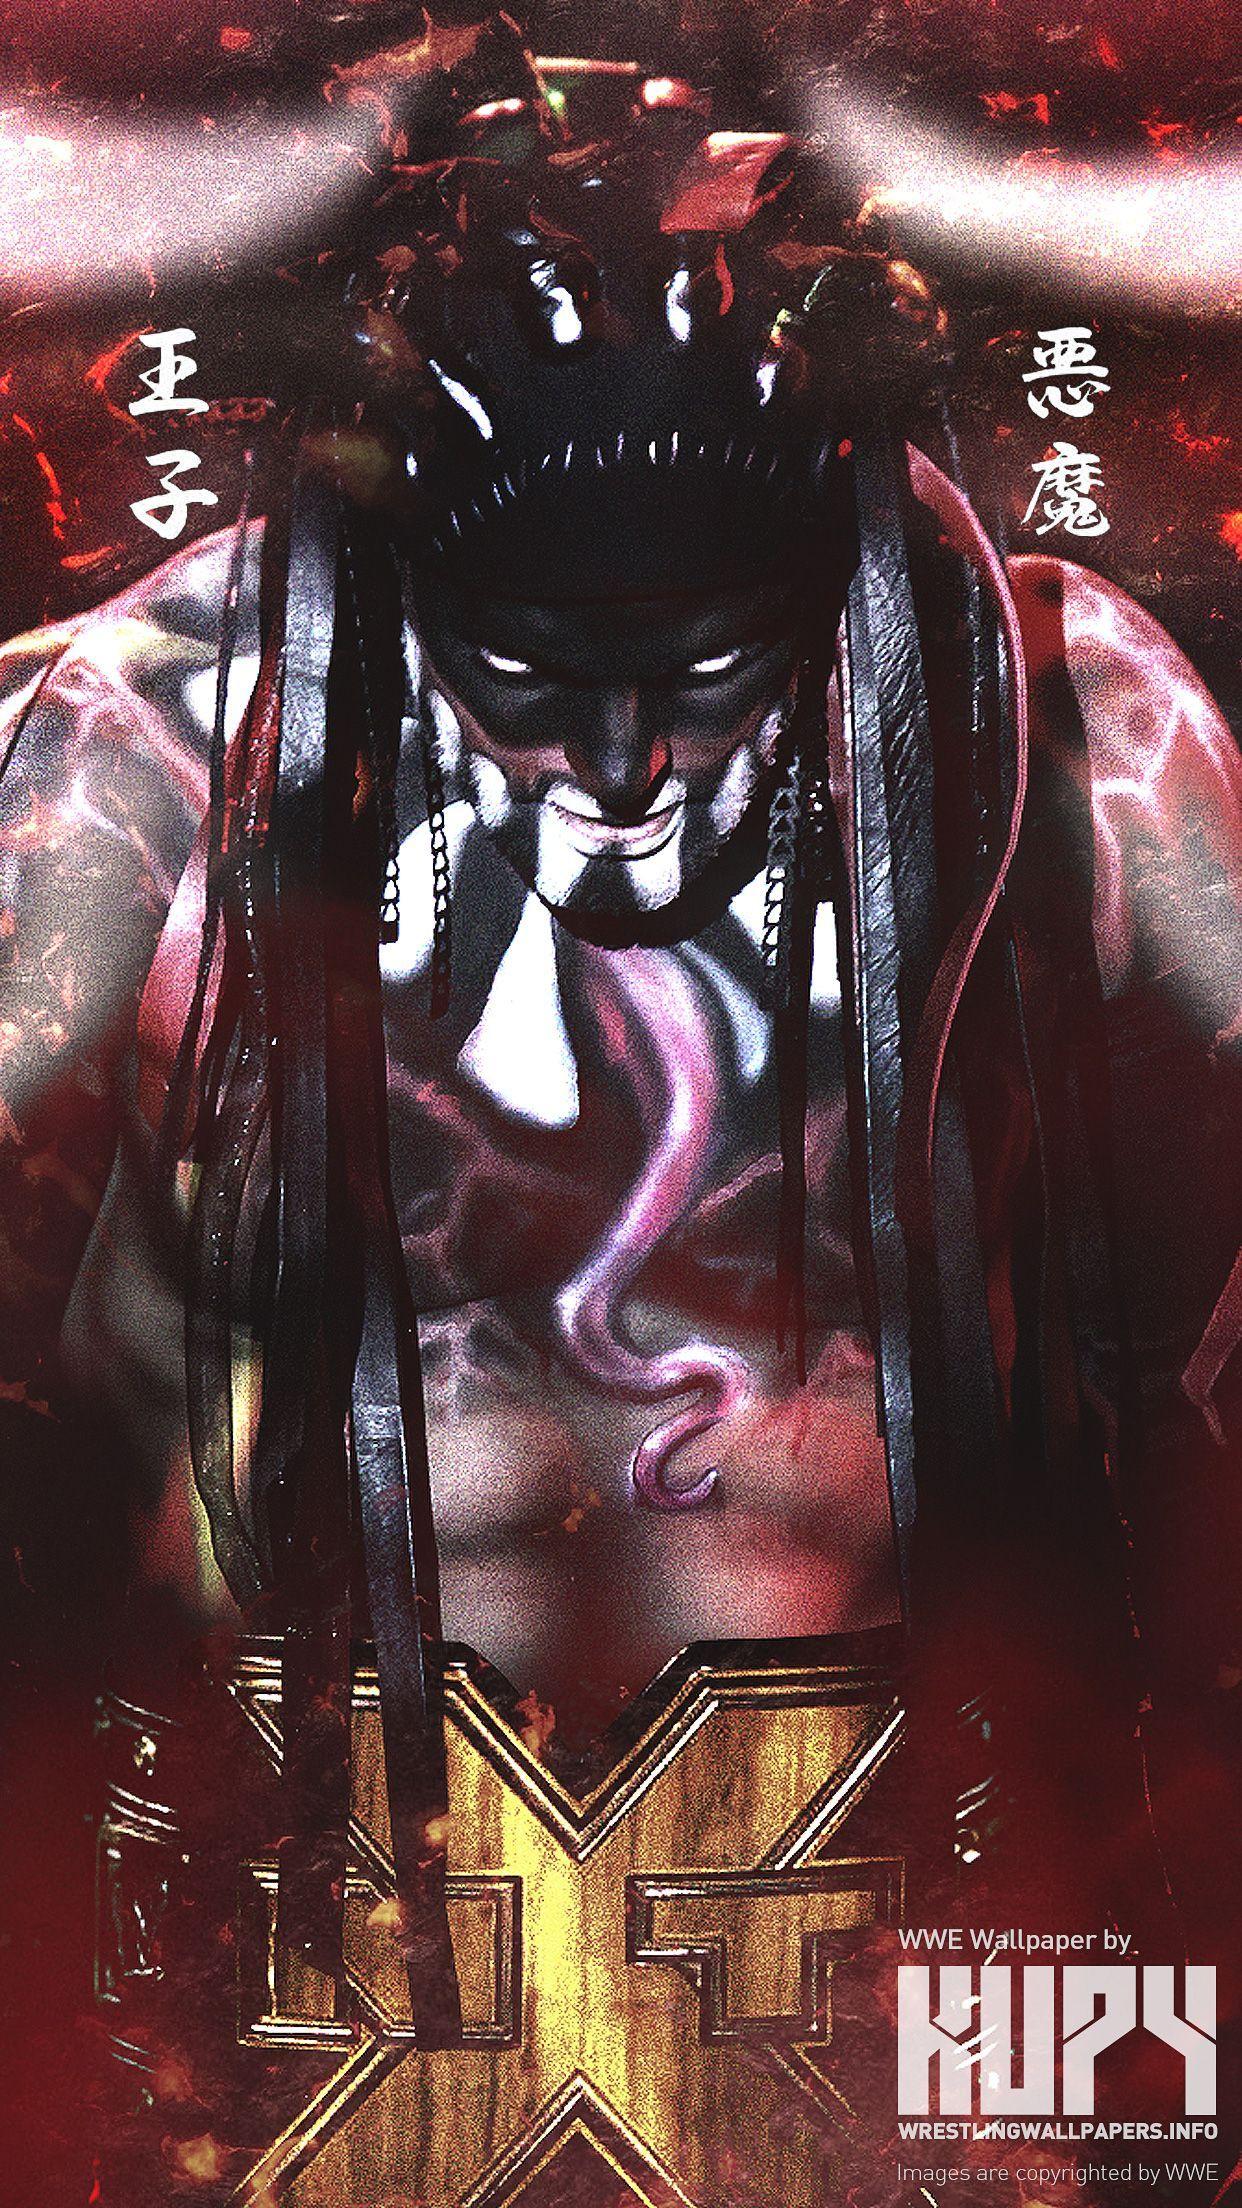 Wwe iPhone wallpapers